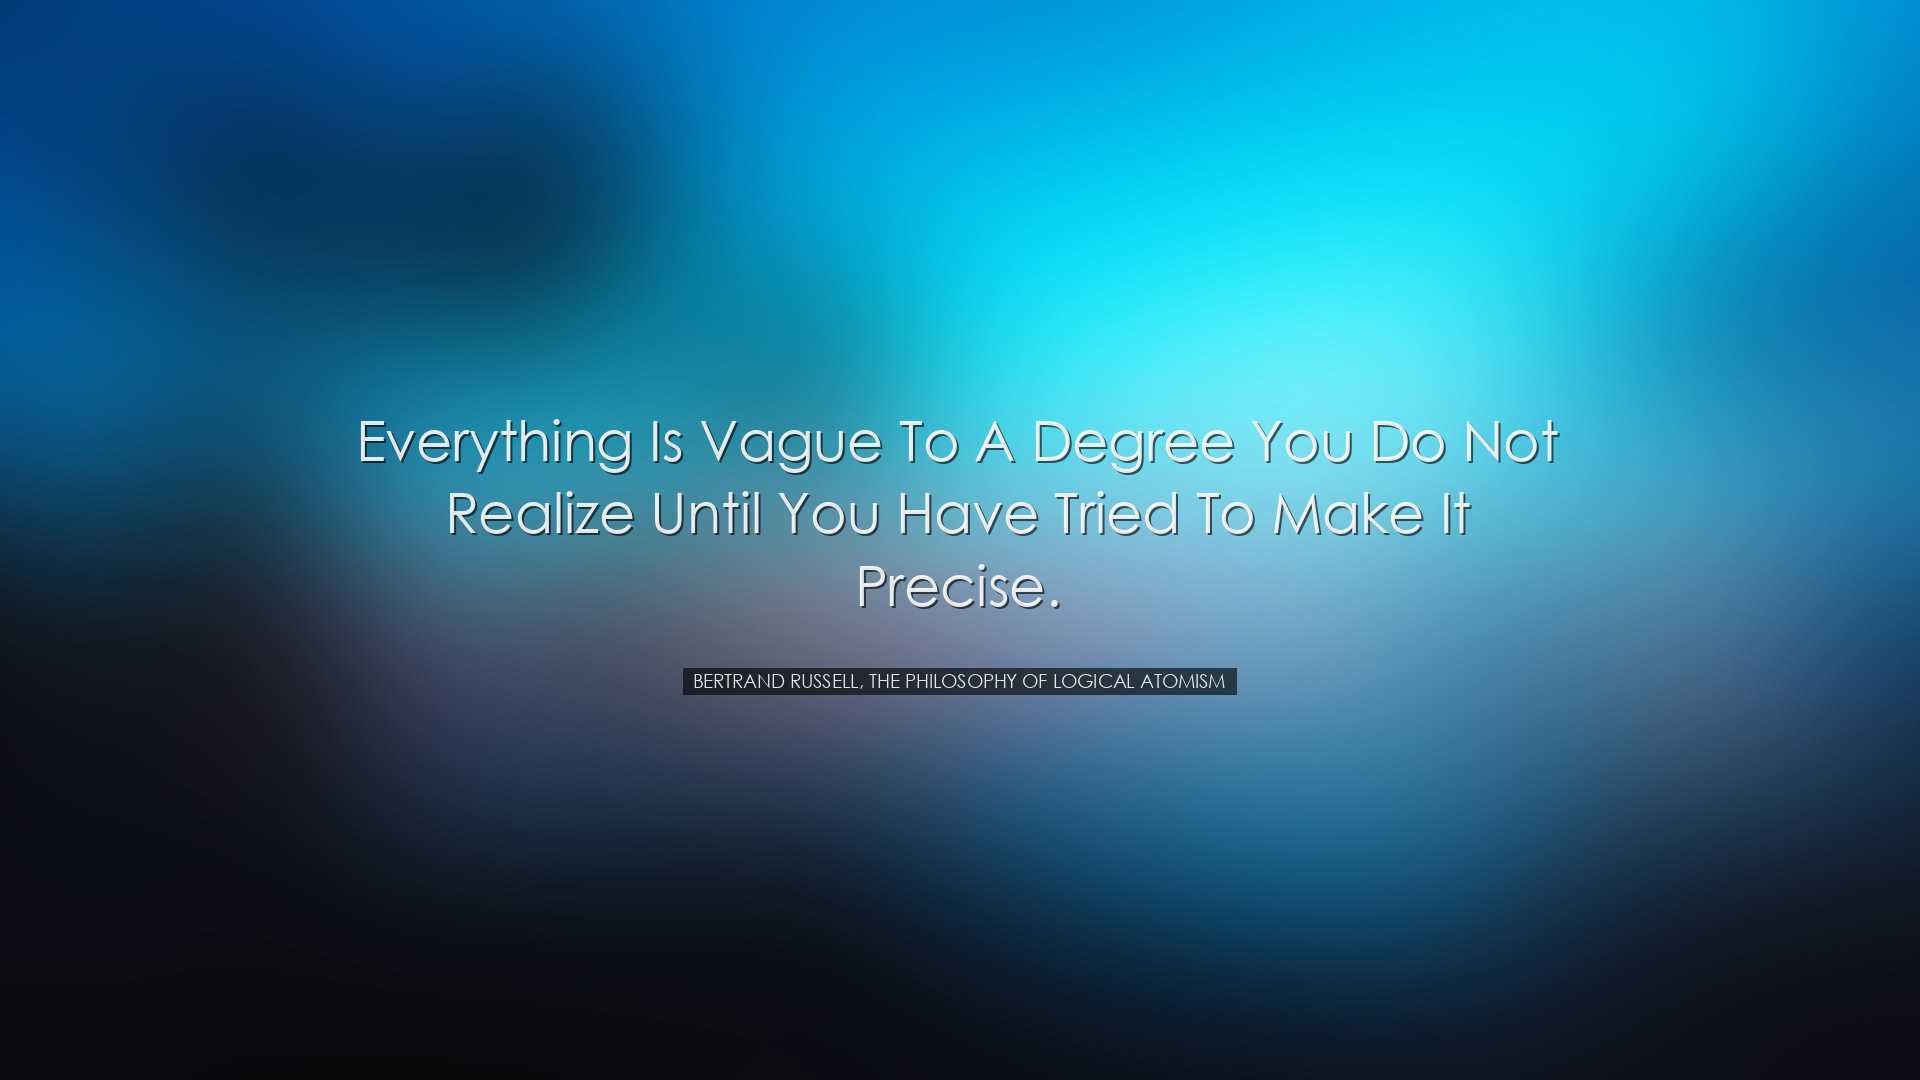 Everything is vague to a degree you do not realize until you have